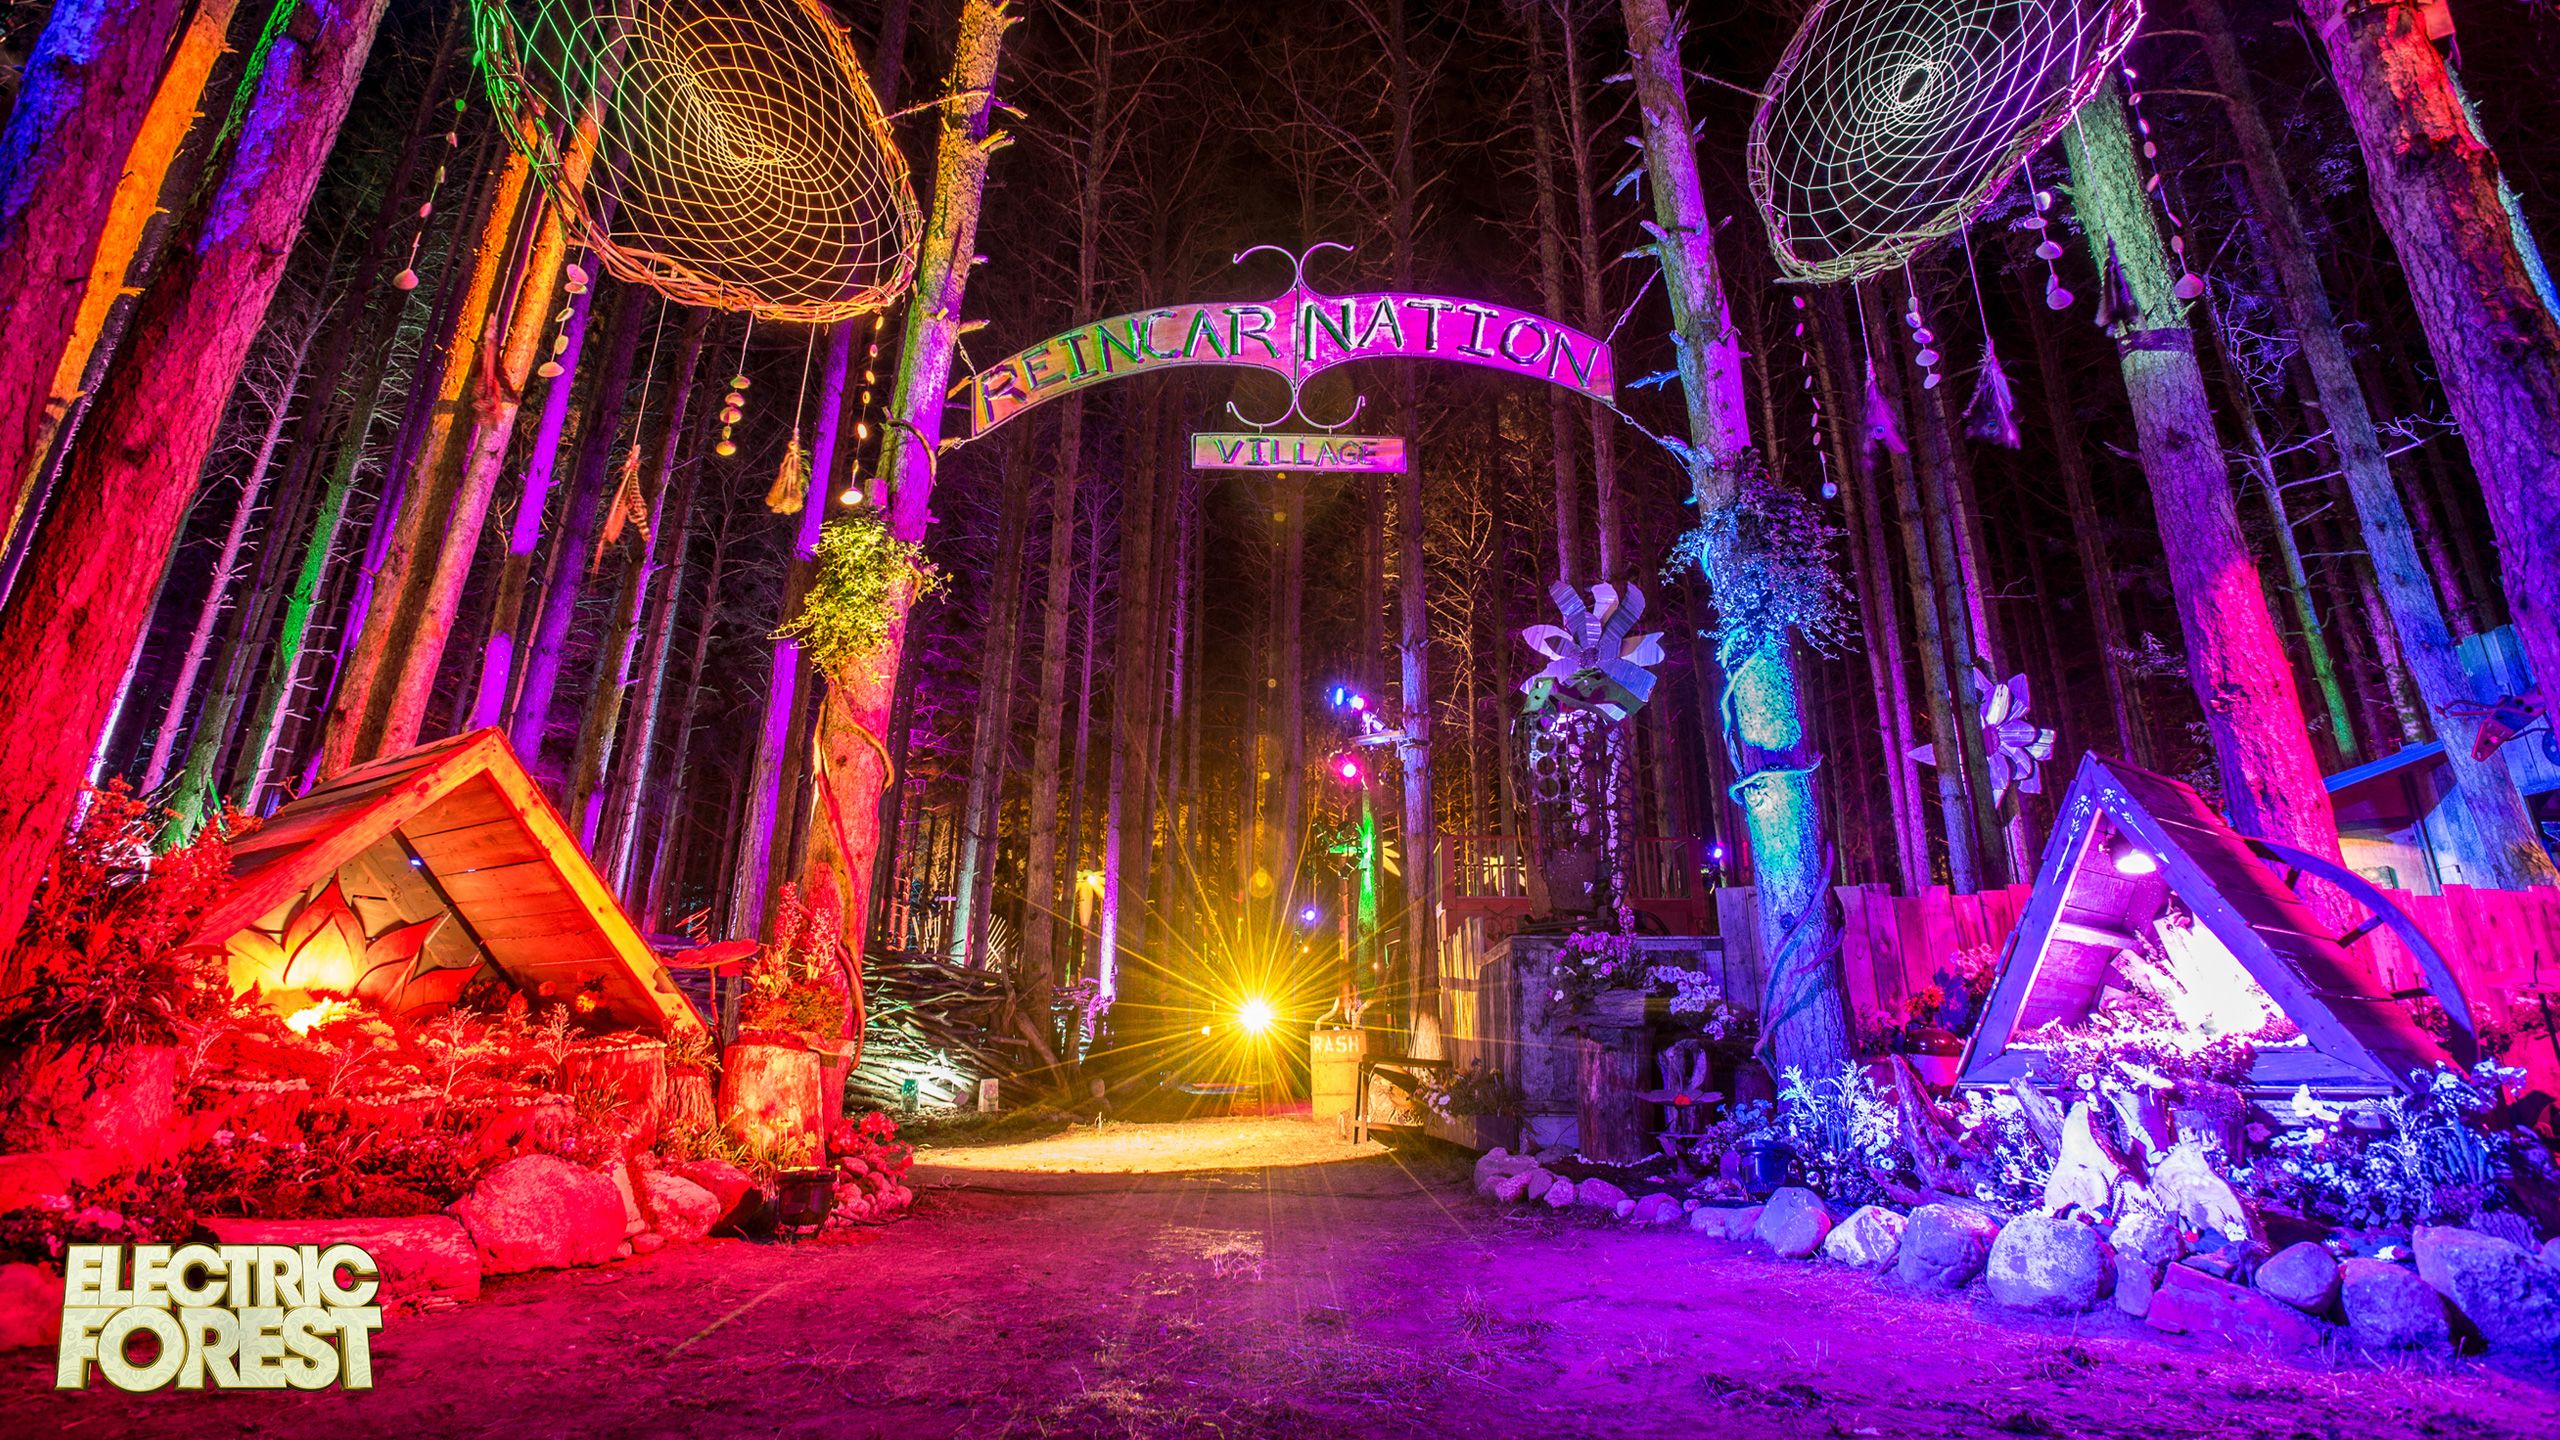 Electric Forest Festival Wallpaper. Electric Wallpaper, Electric Wizard Wallpaper And T Rex Electric Warrior Wallpaper